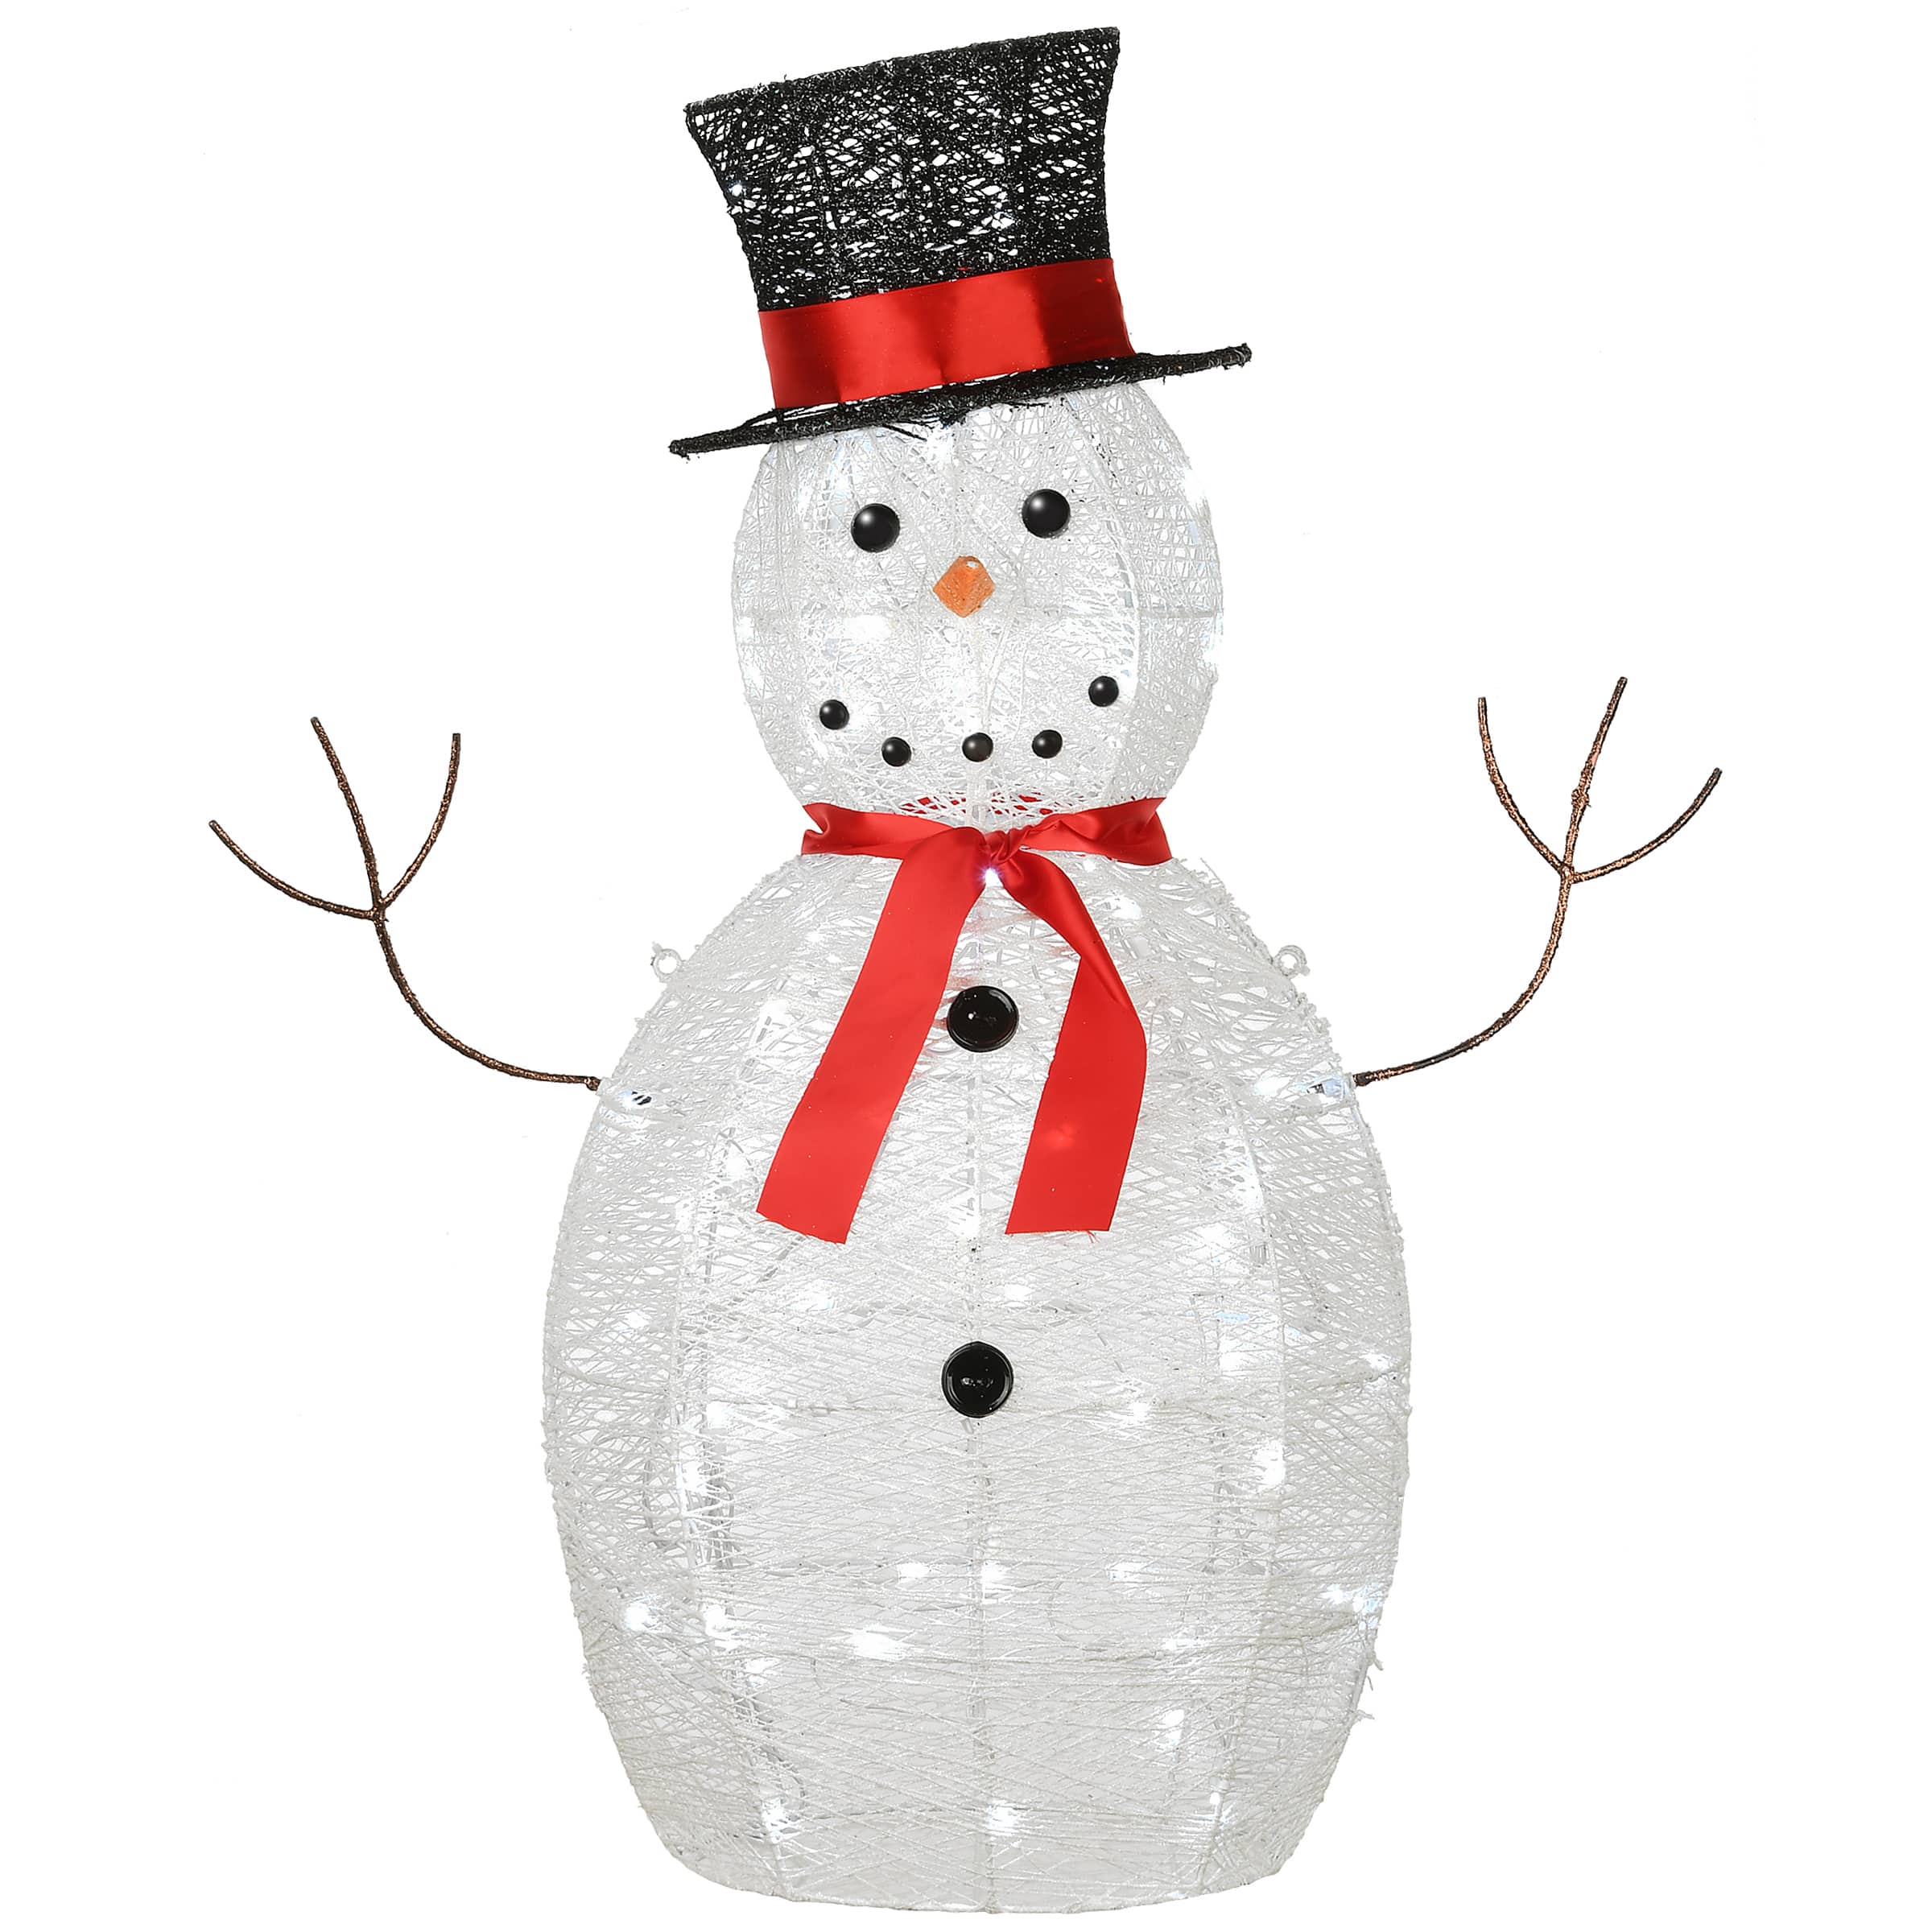 30 Small Snow Stickers - snowman - Deco, Furniture for Professionals -  Decoration Brands